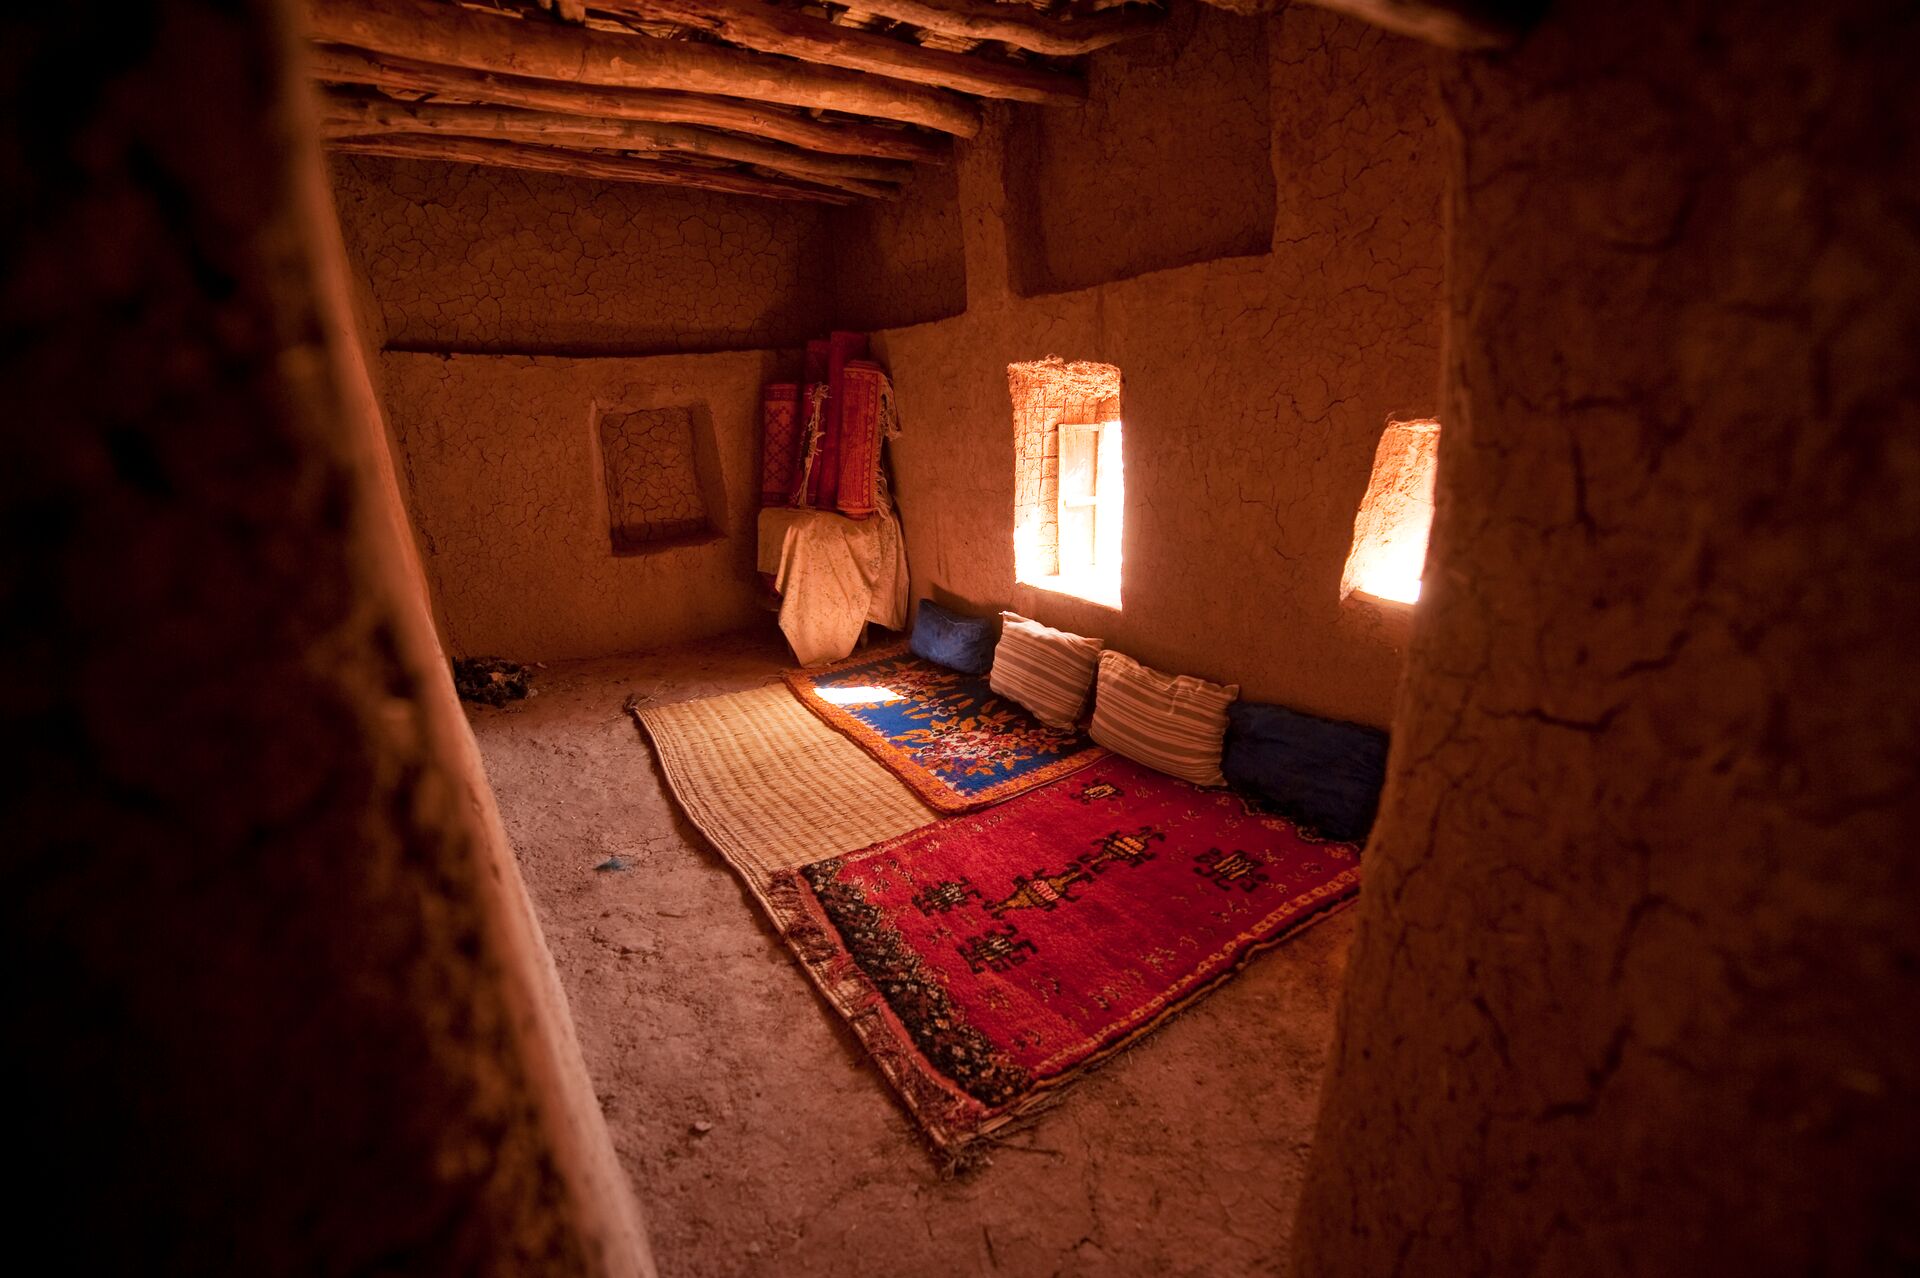 Image of a traditional Berber hours, showing a basic room with colourful mats and pillows on the floor